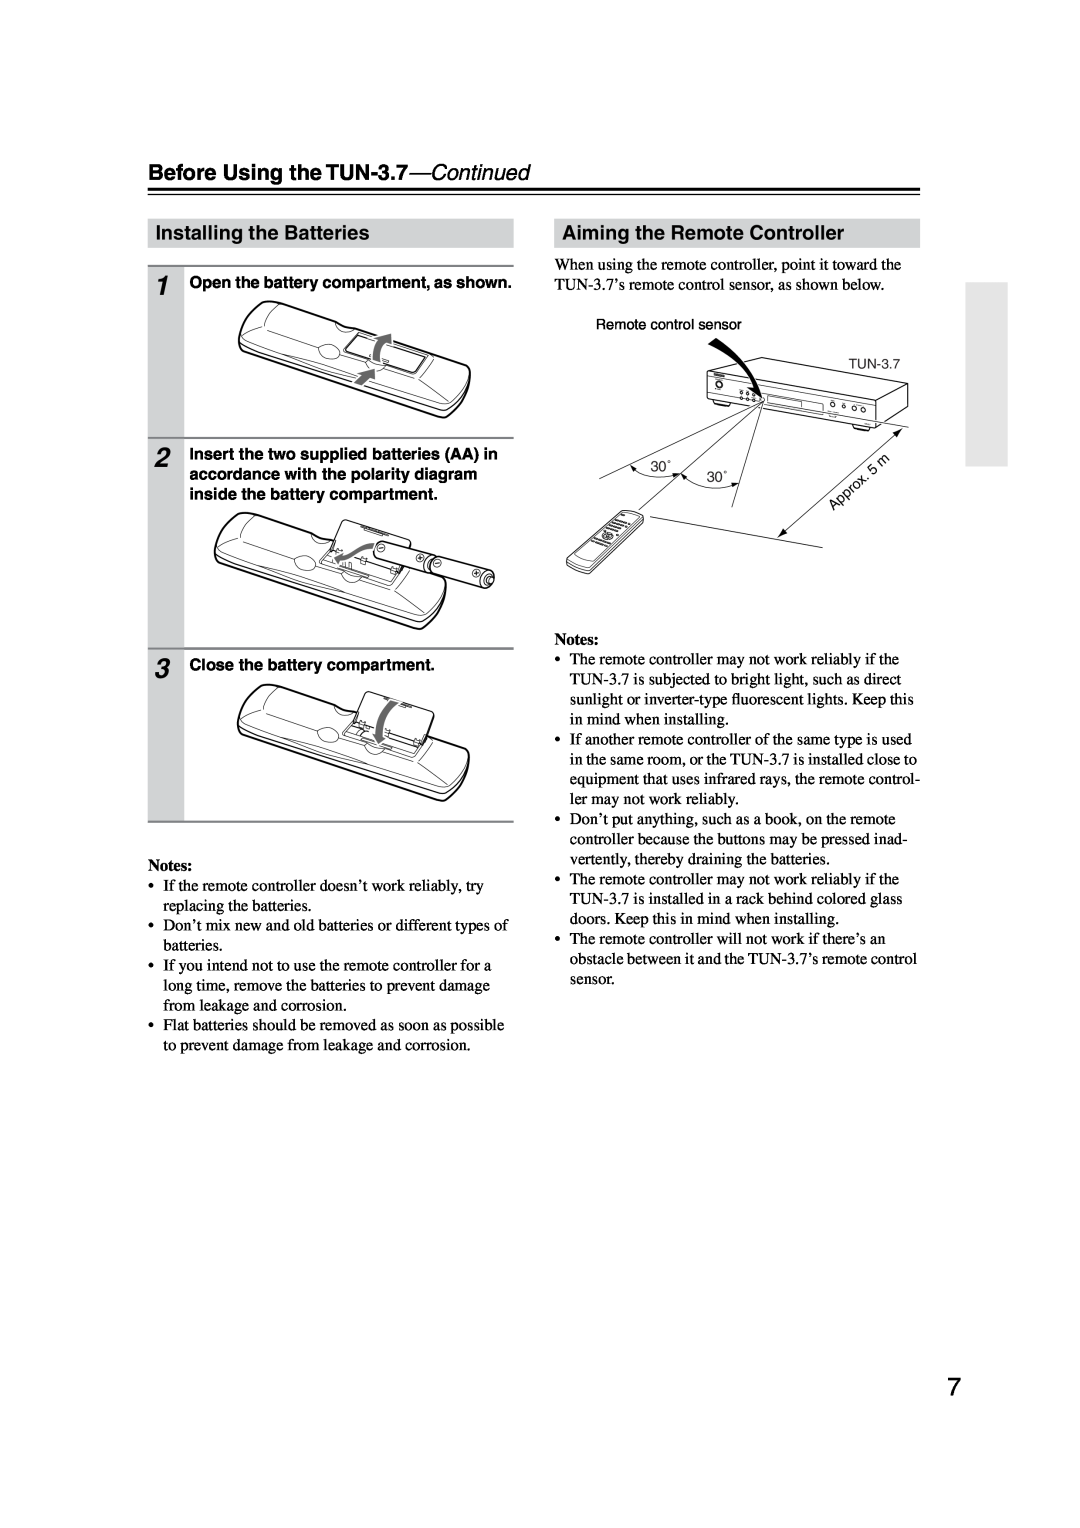 Integra instruction manual Before Using the TUN-3.7-Continued, Installing the Batteries, Aiming the Remote Controller 